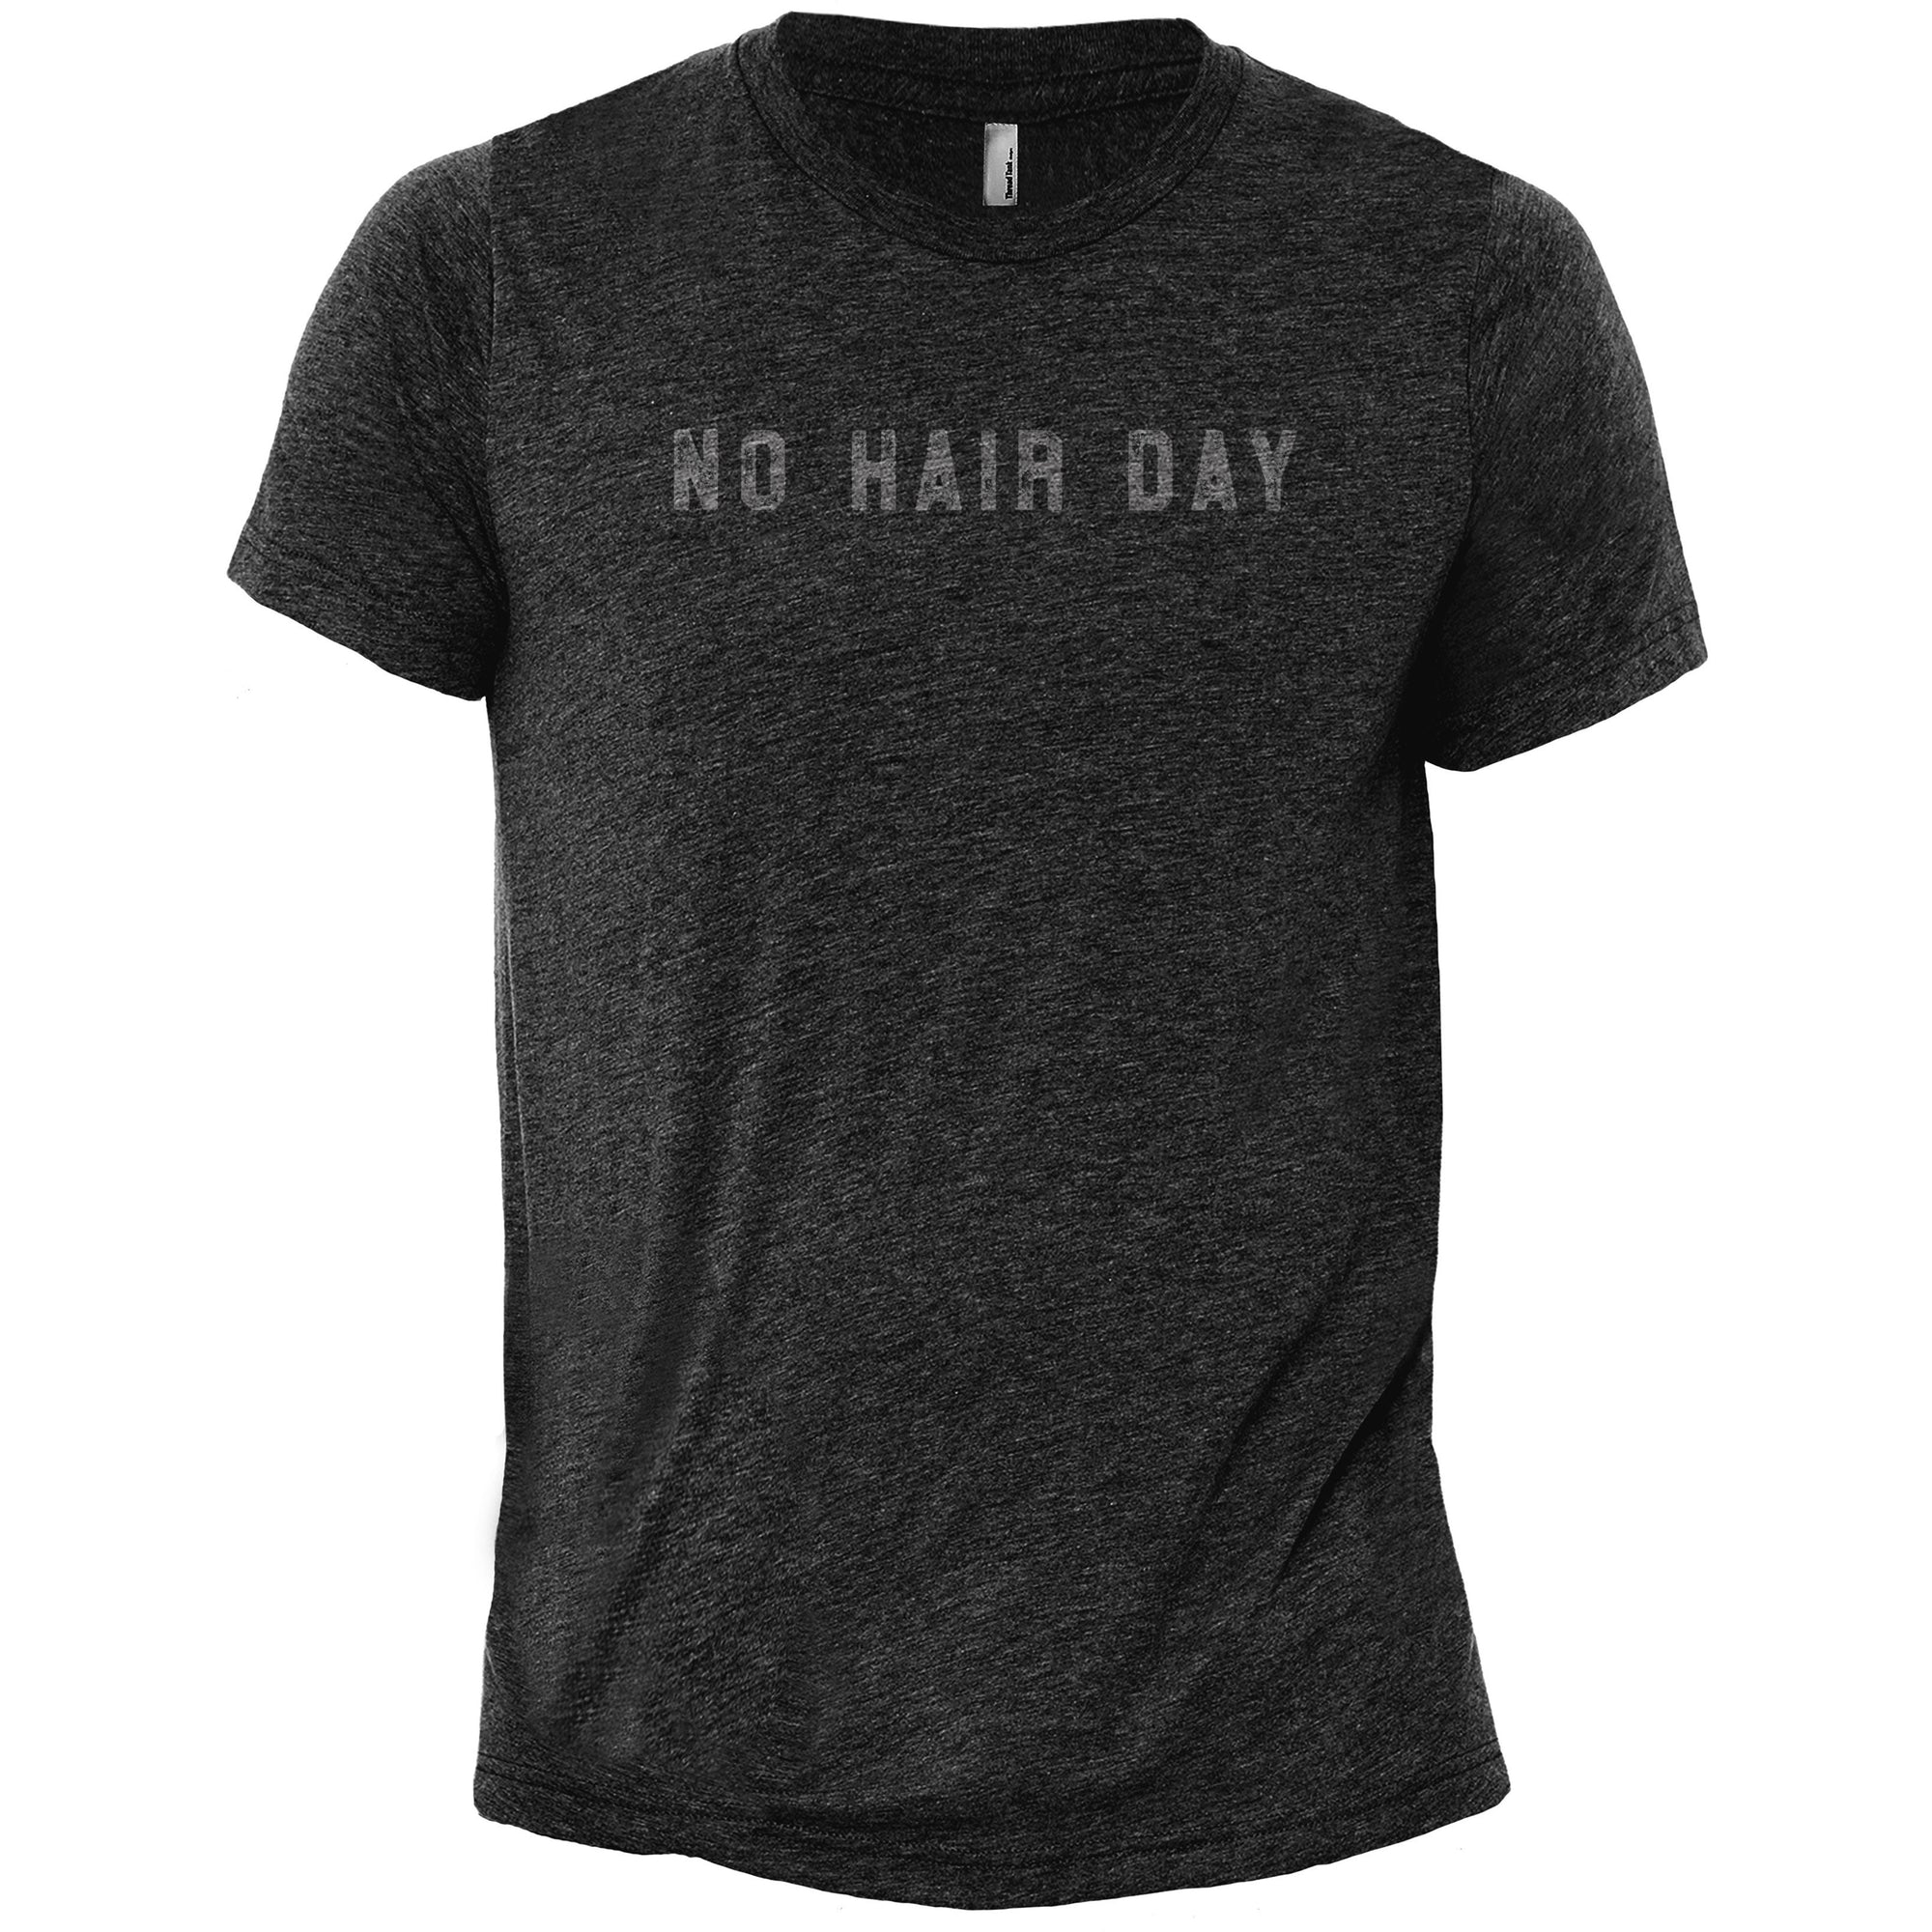 No Hair Day Charcoal Printed Graphic Men's Crew T-Shirt Tee